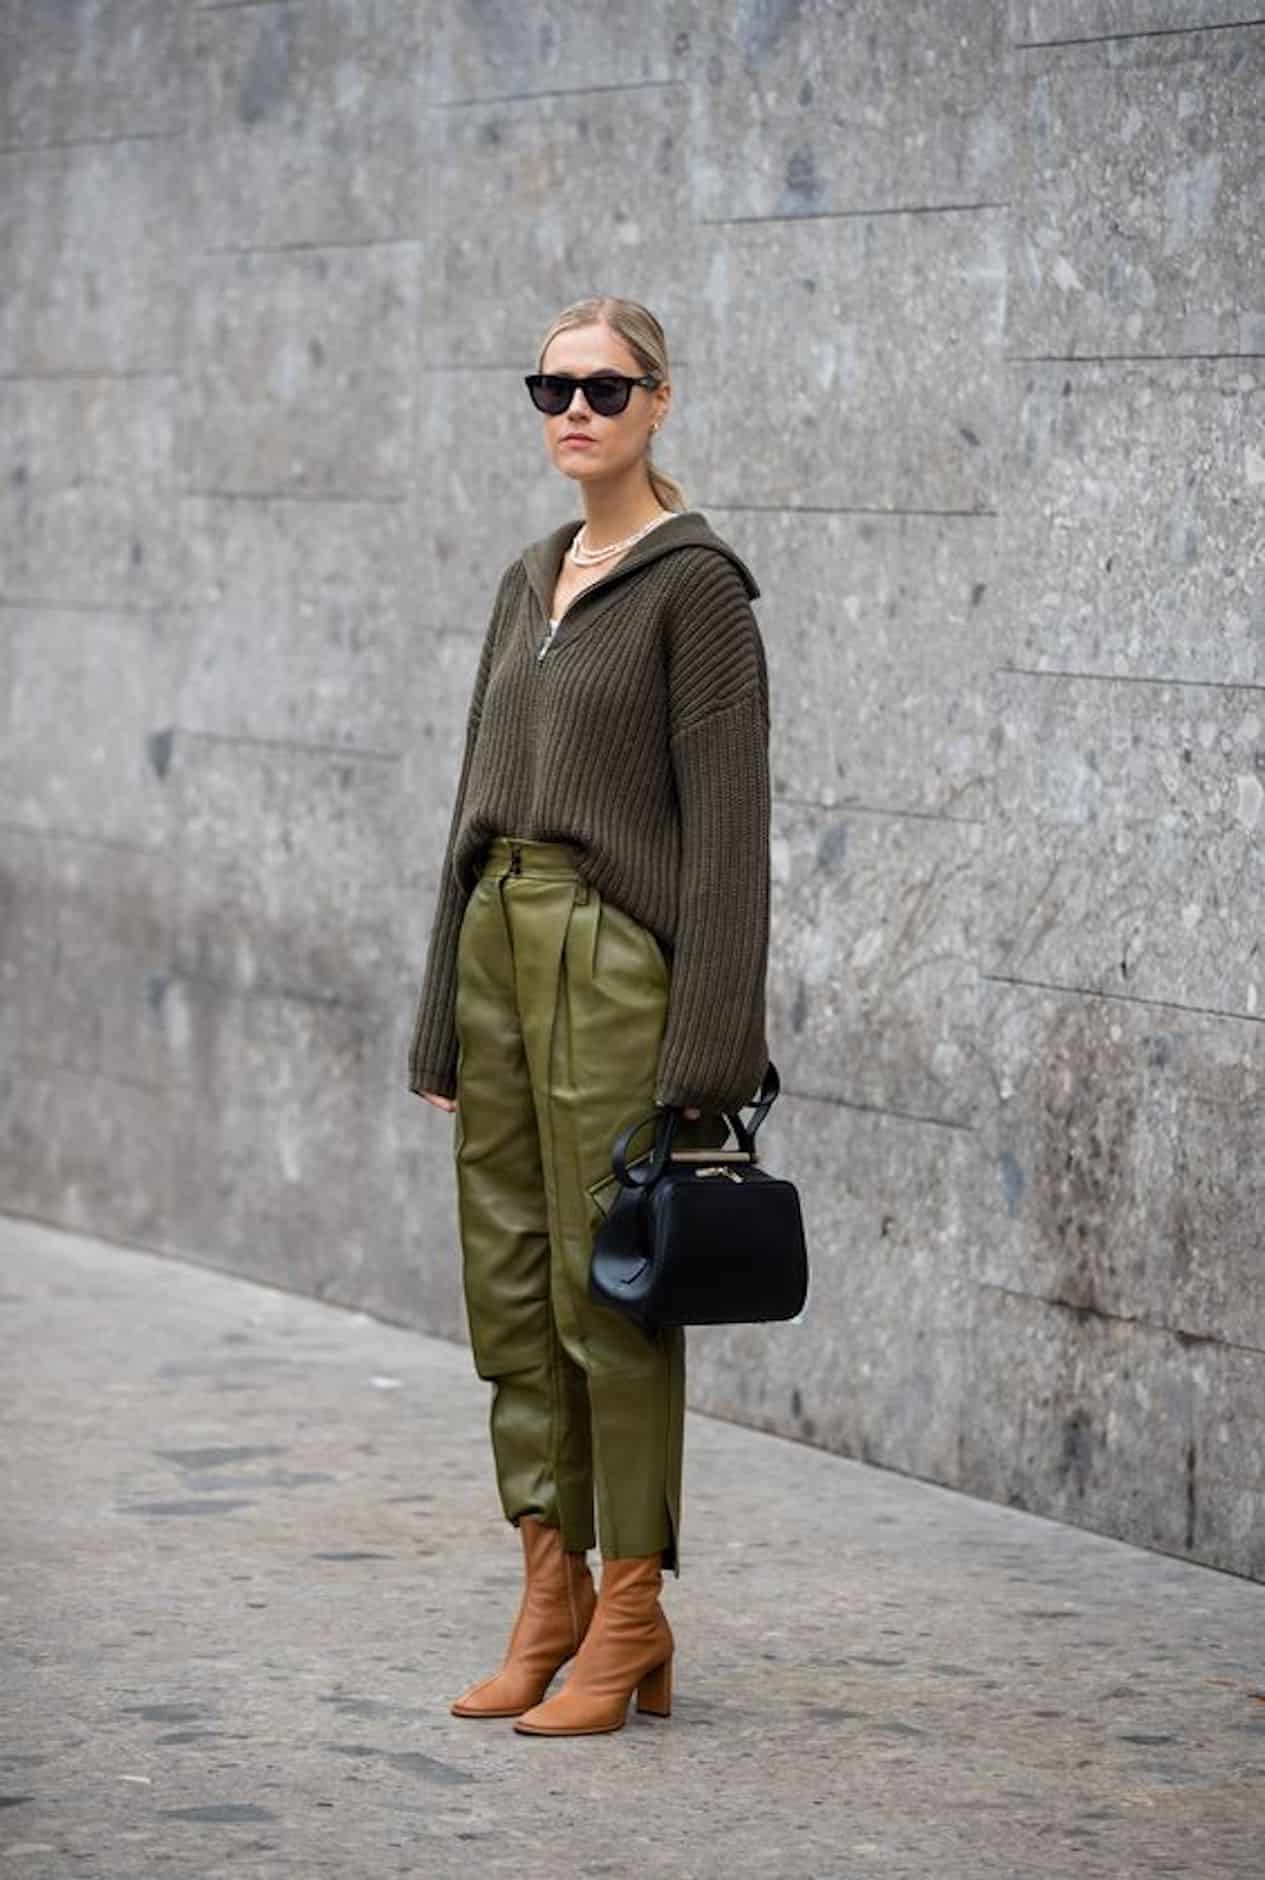 image of a woman standing in front of a grey wall wearing an all green outfit with brown boots